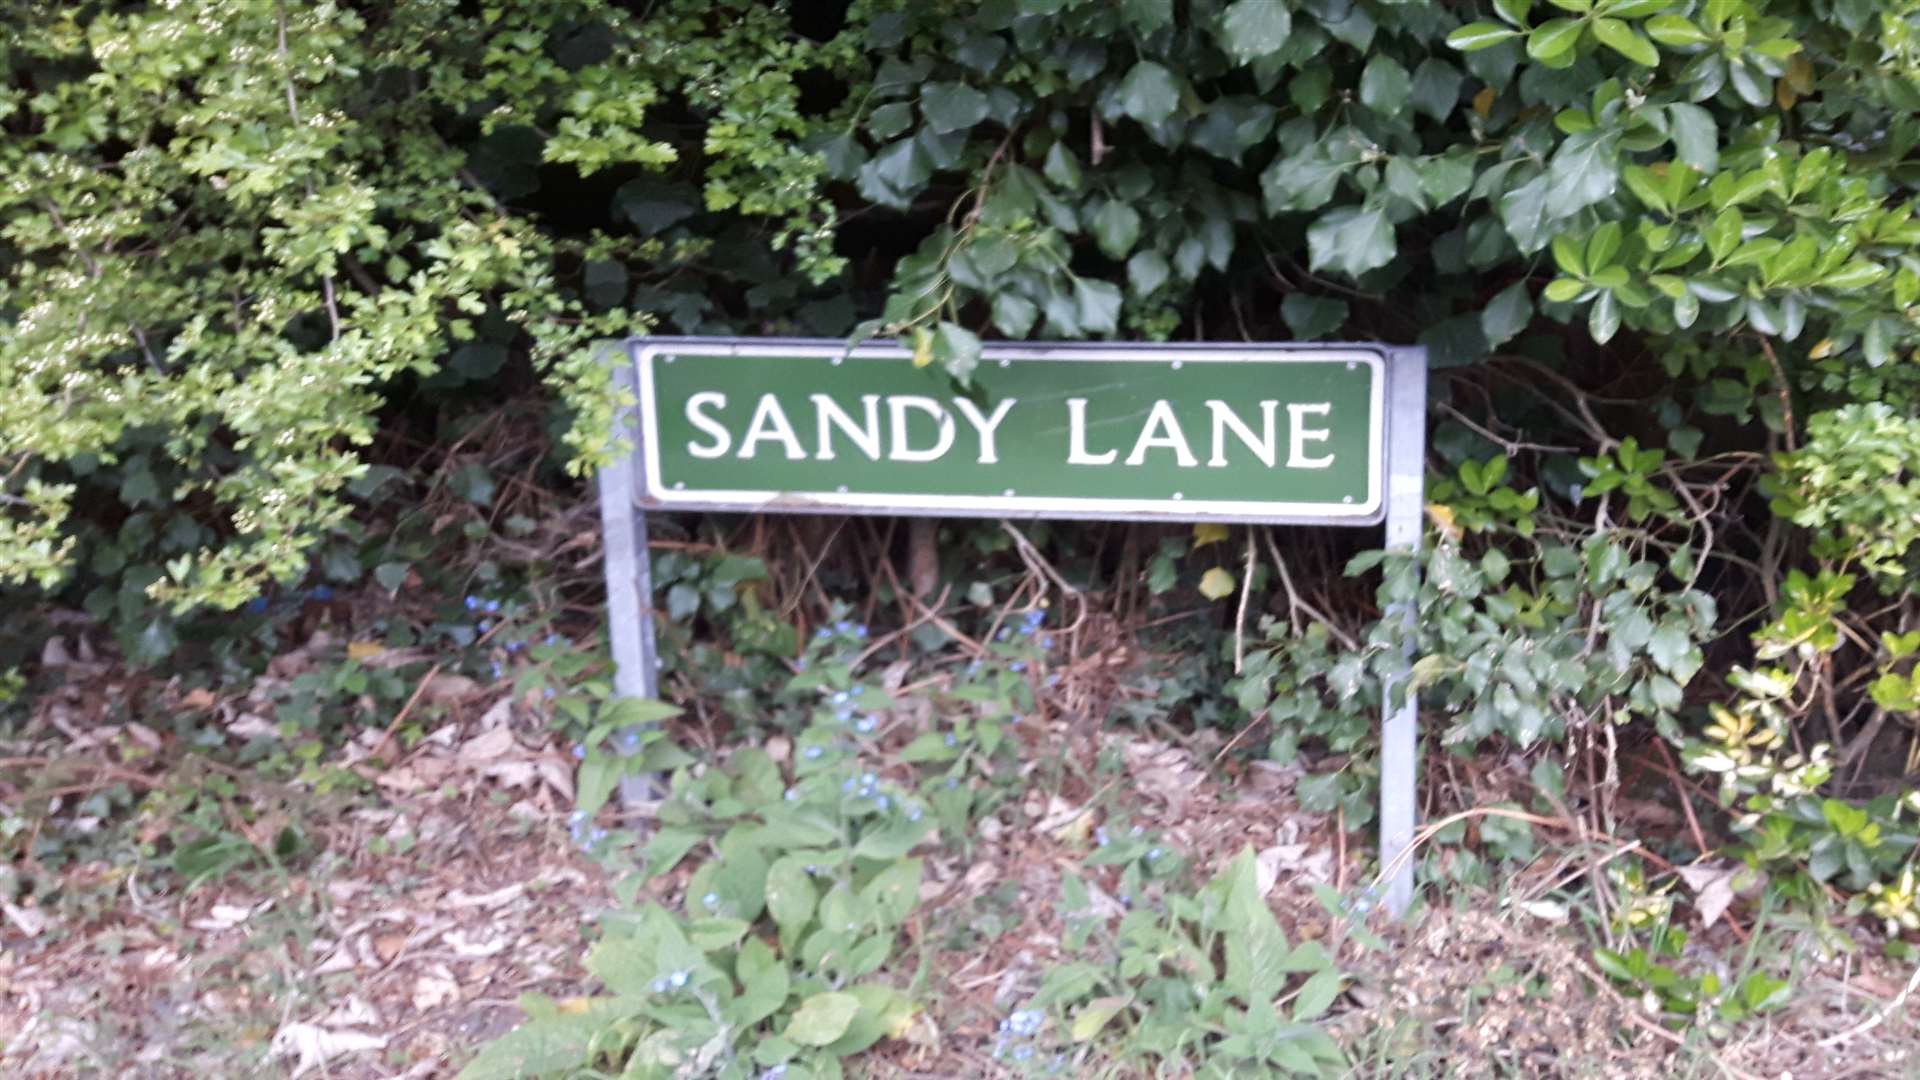 Sandy Lane is a quiet road barely wide enough for one car in some parts